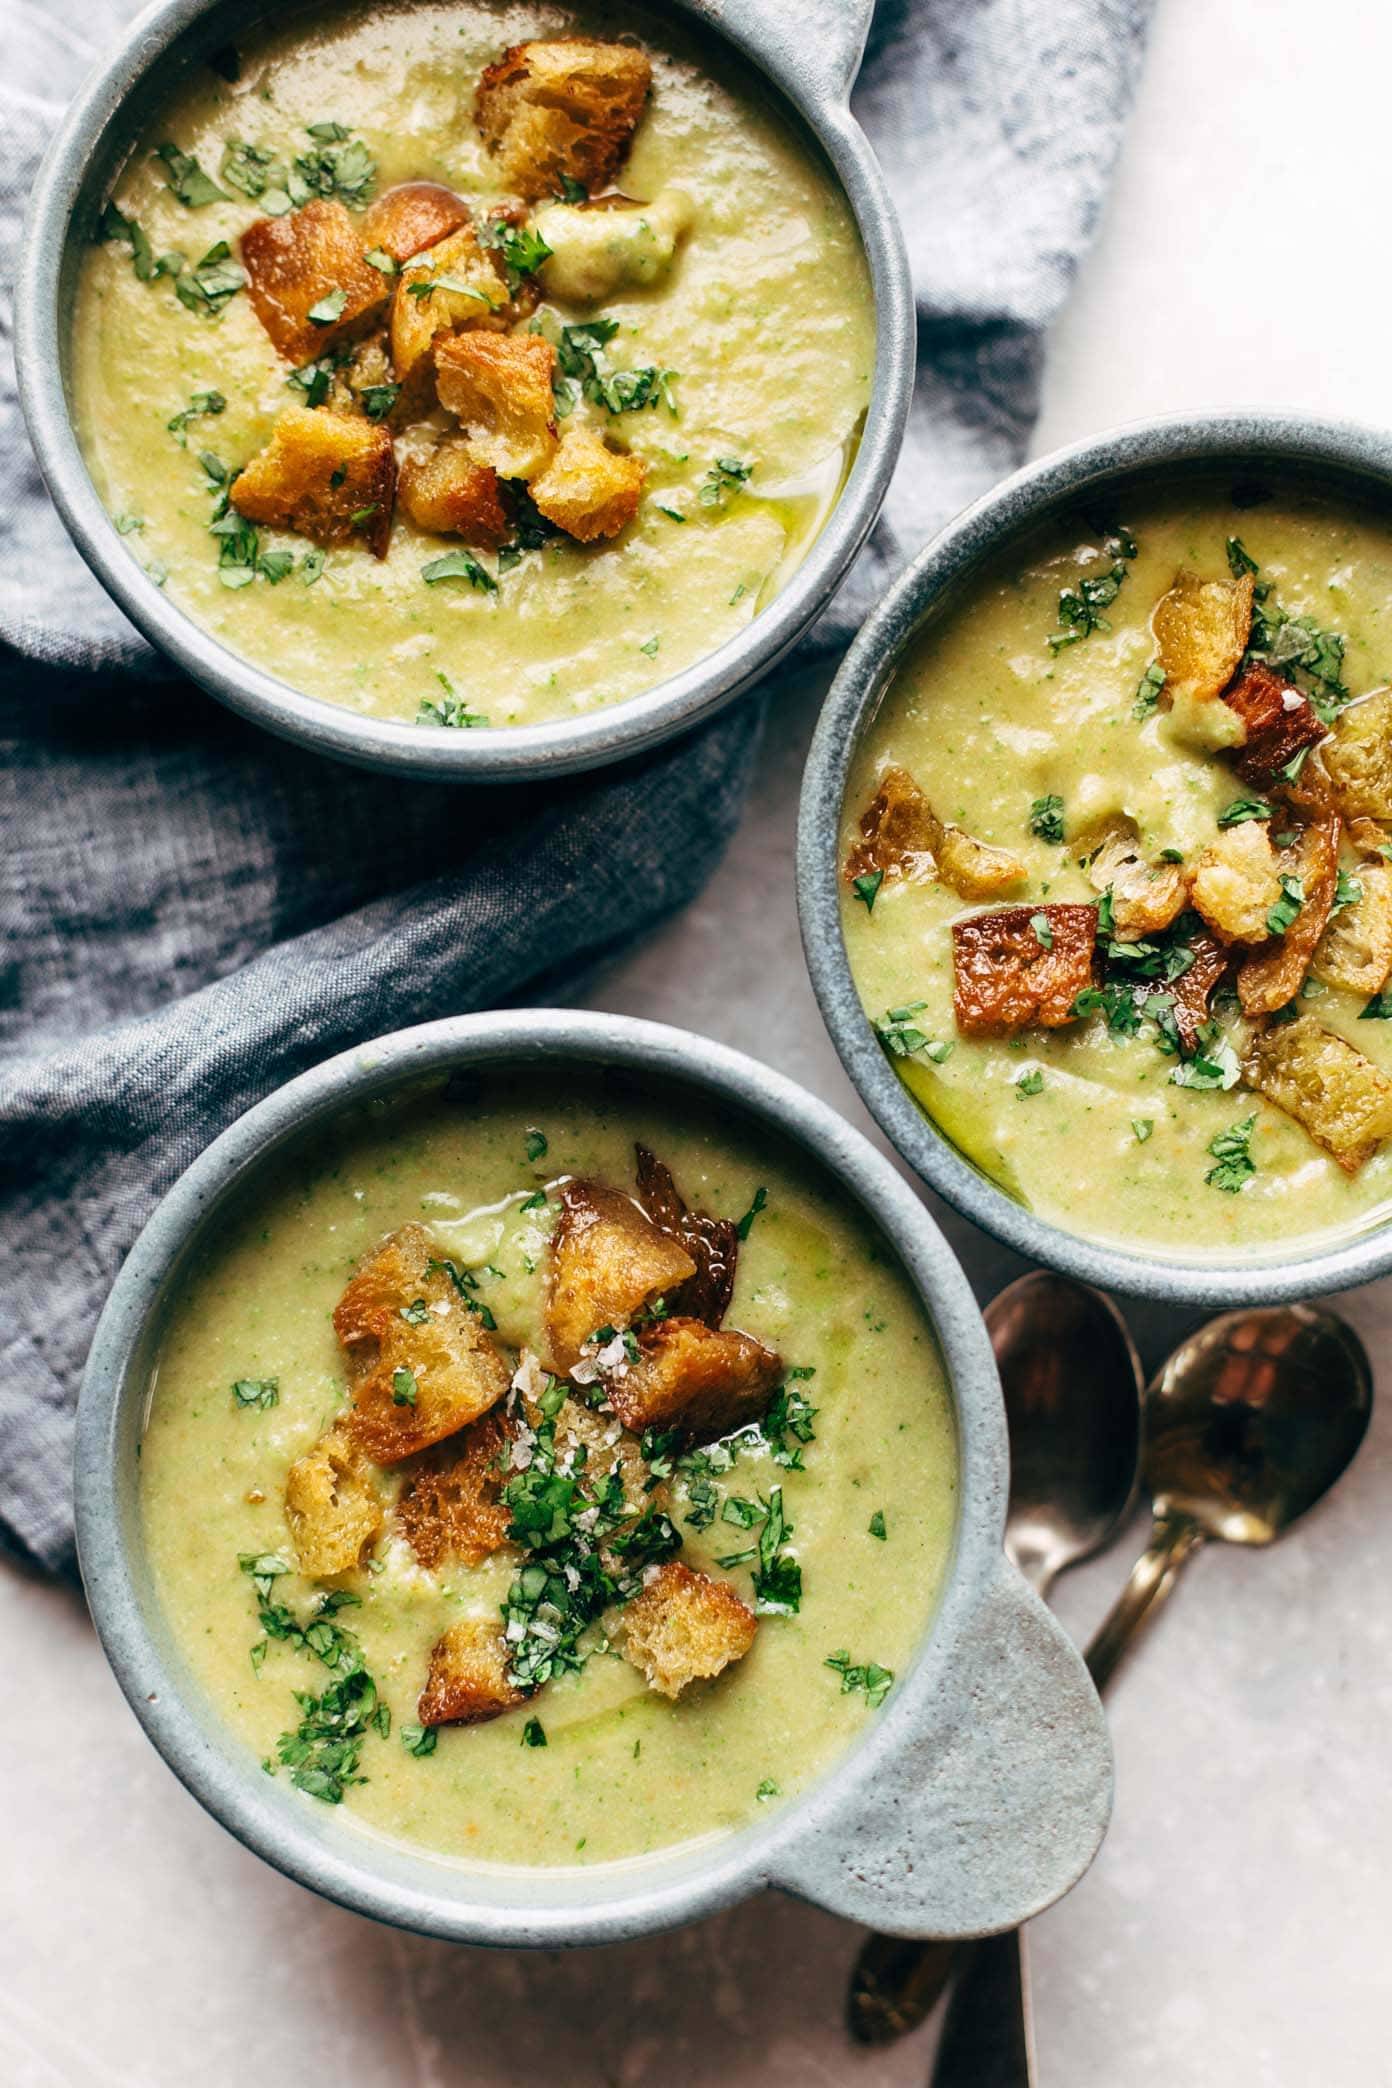 The Best Detox Broccoli Cheese Soup